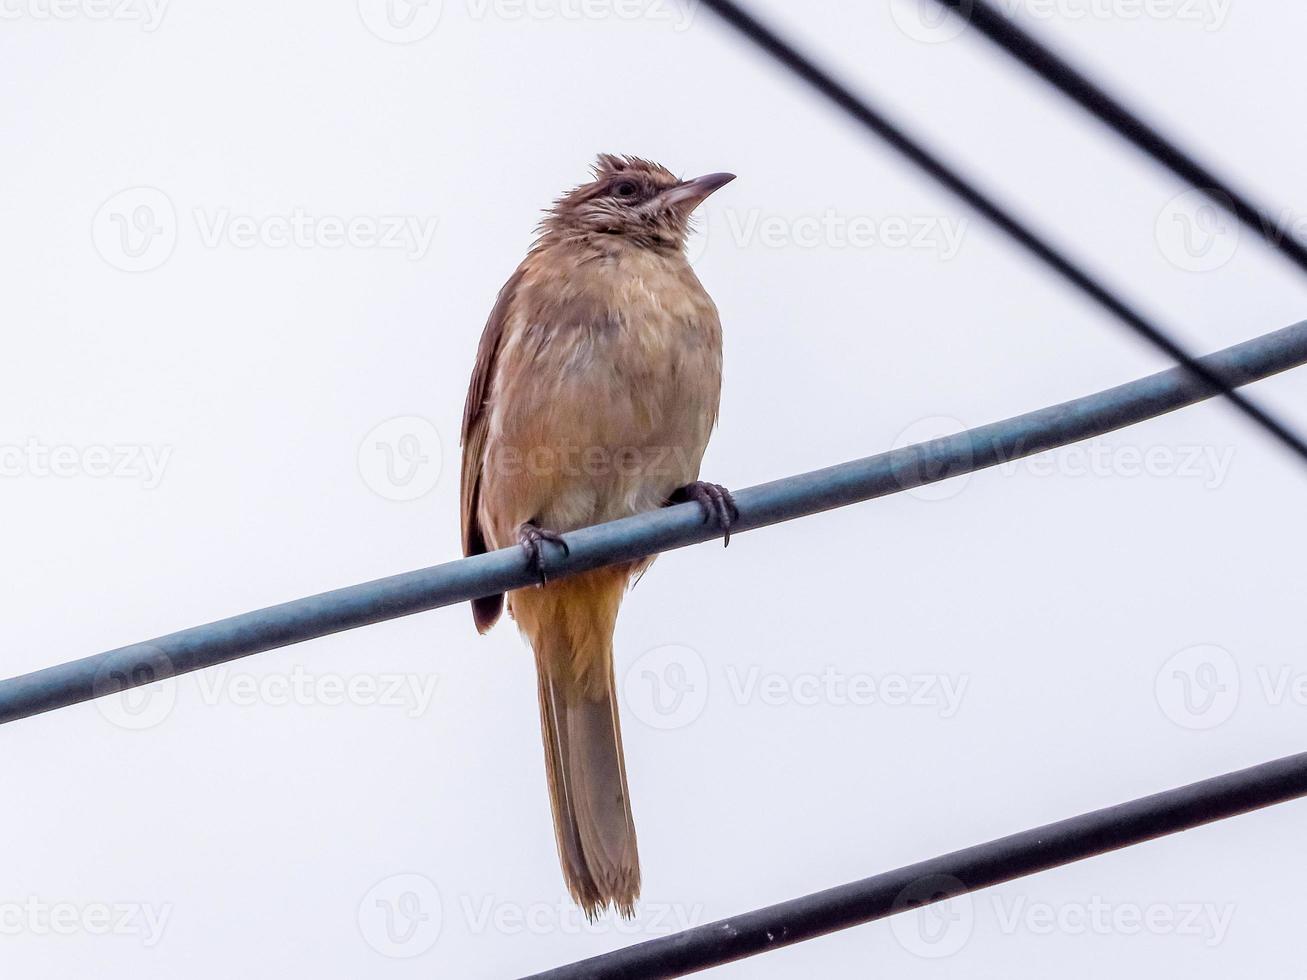 Streak-eared Bulbul perched on wire photo